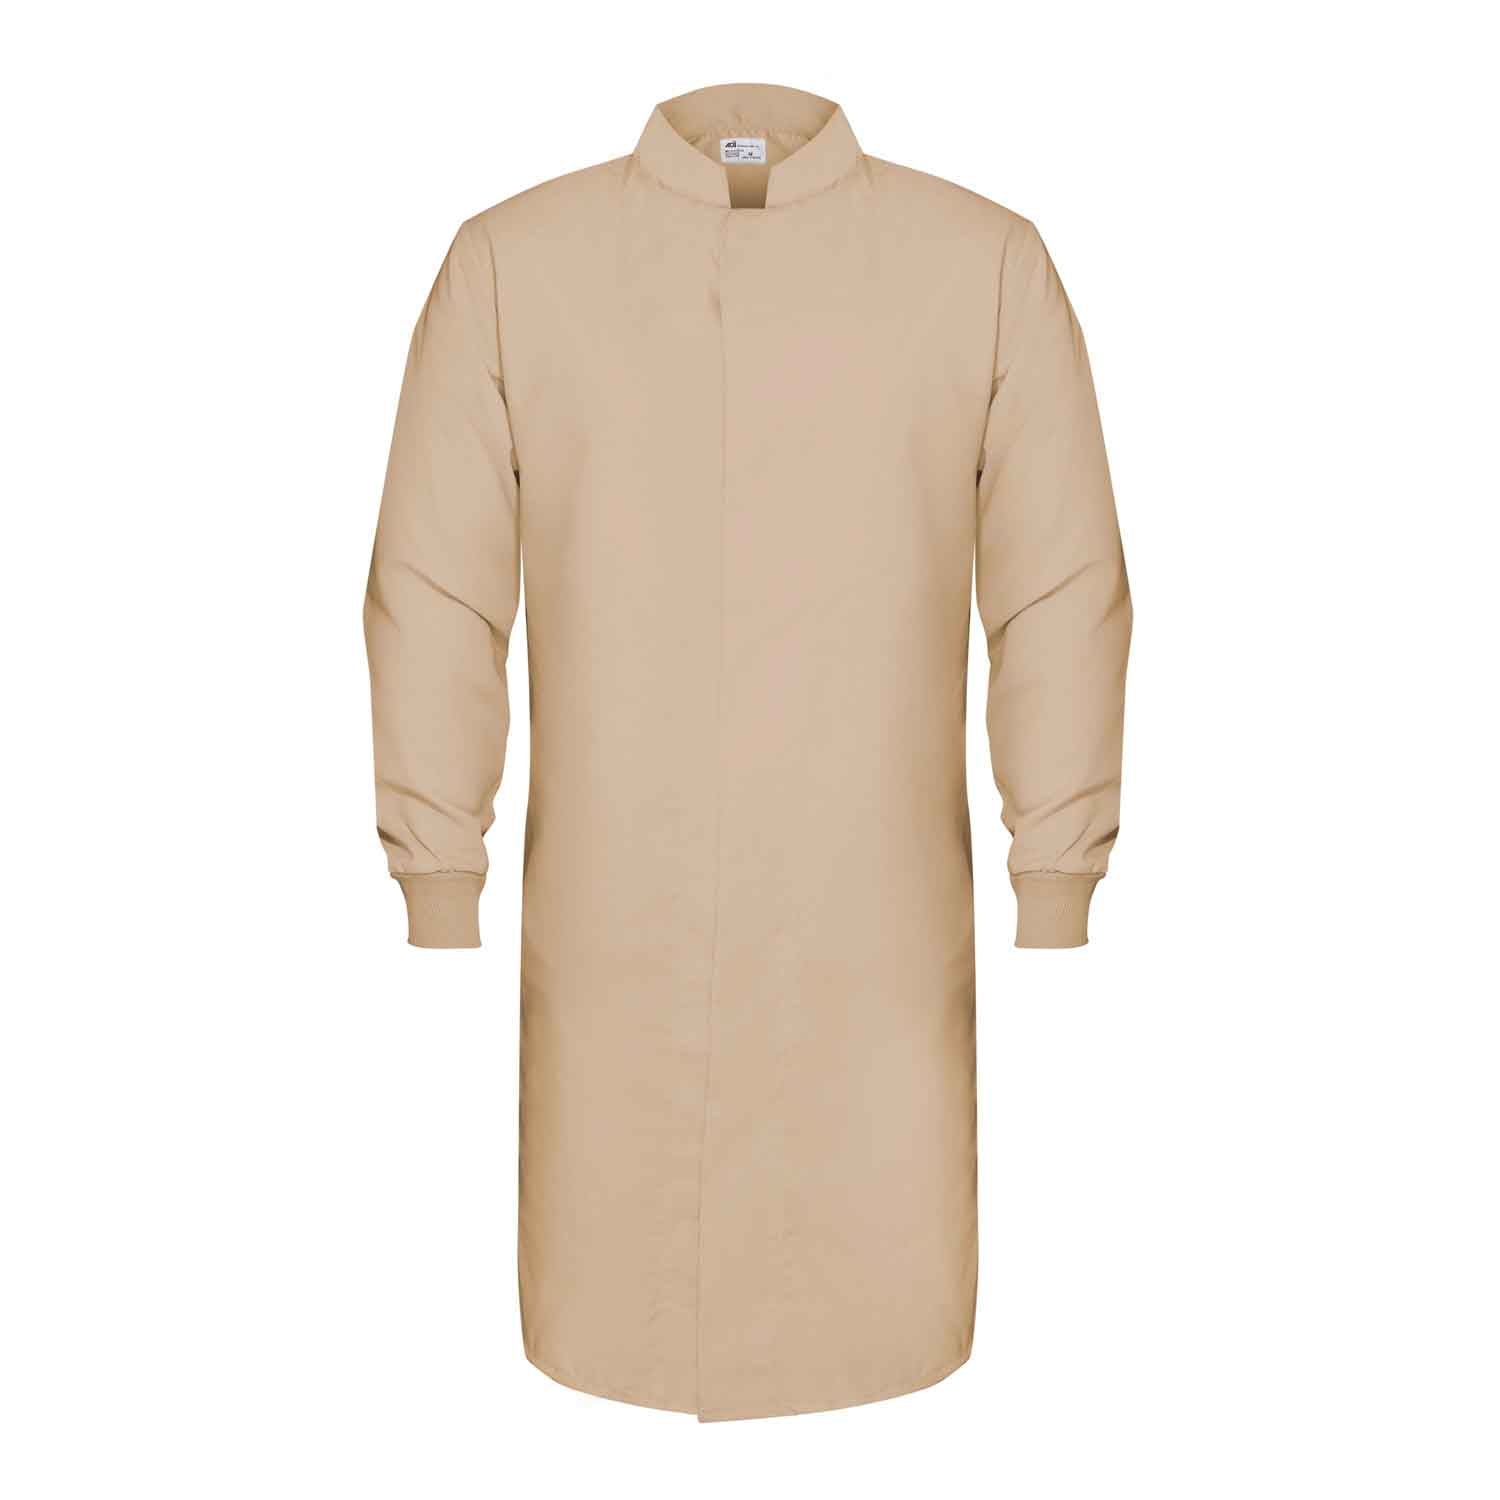 American Dawn | X-Small Tan Lab Coat With Long Sleeves And No Pockets